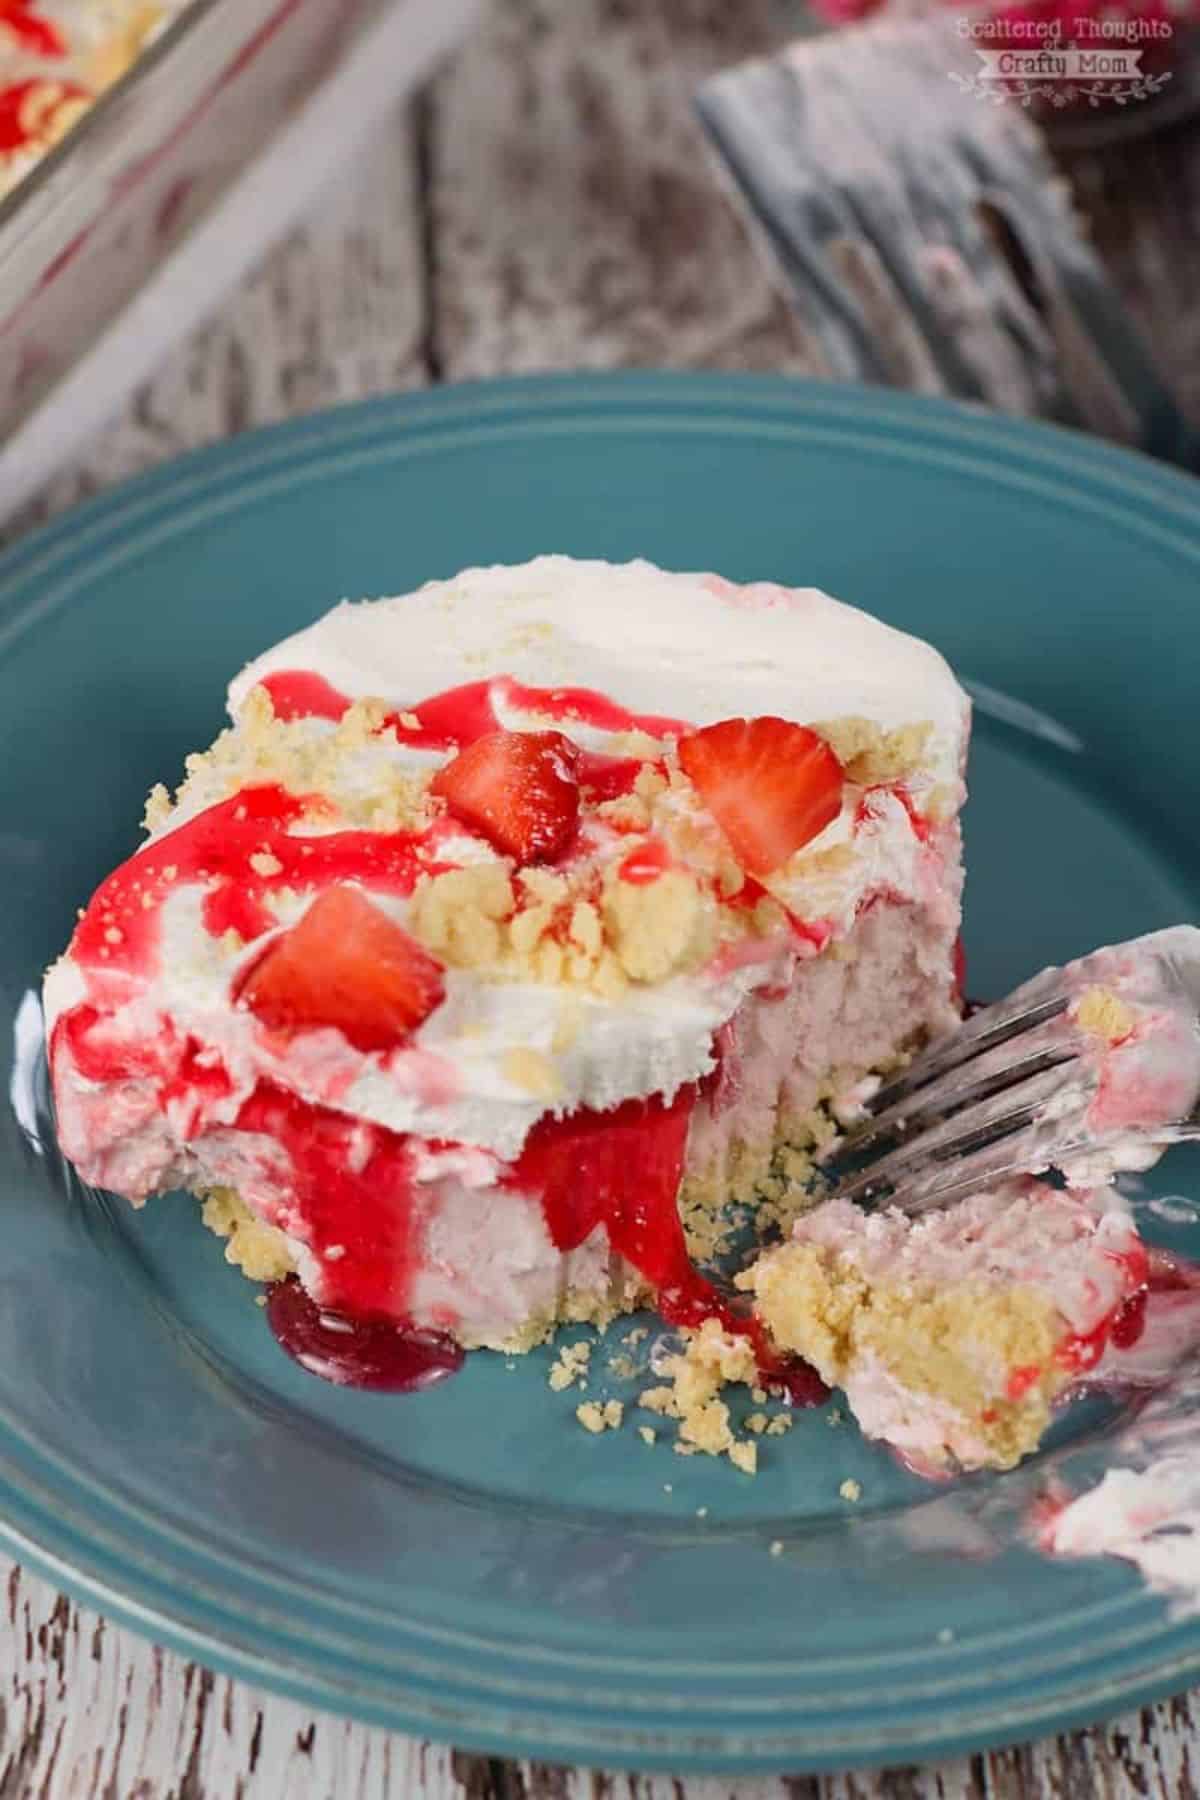 A piece of frozen strawberry ice cream cake on a blue plate with a fork.